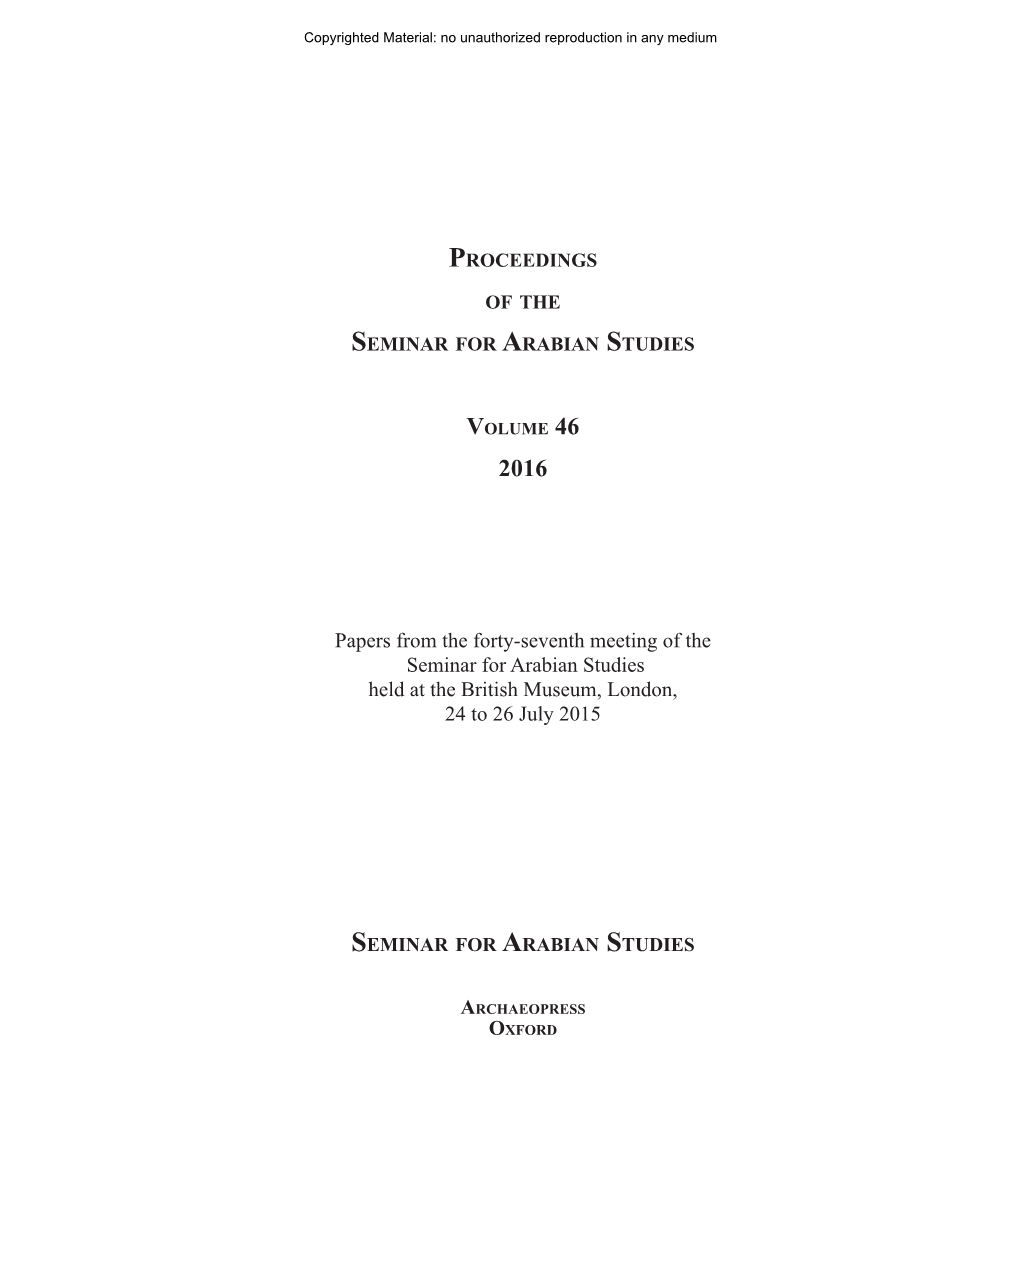 Papers from the Forty-Seventh Meeting of the Seminar for Arabian Studies Held at the British Museum, London, 24 to 26 July 2015